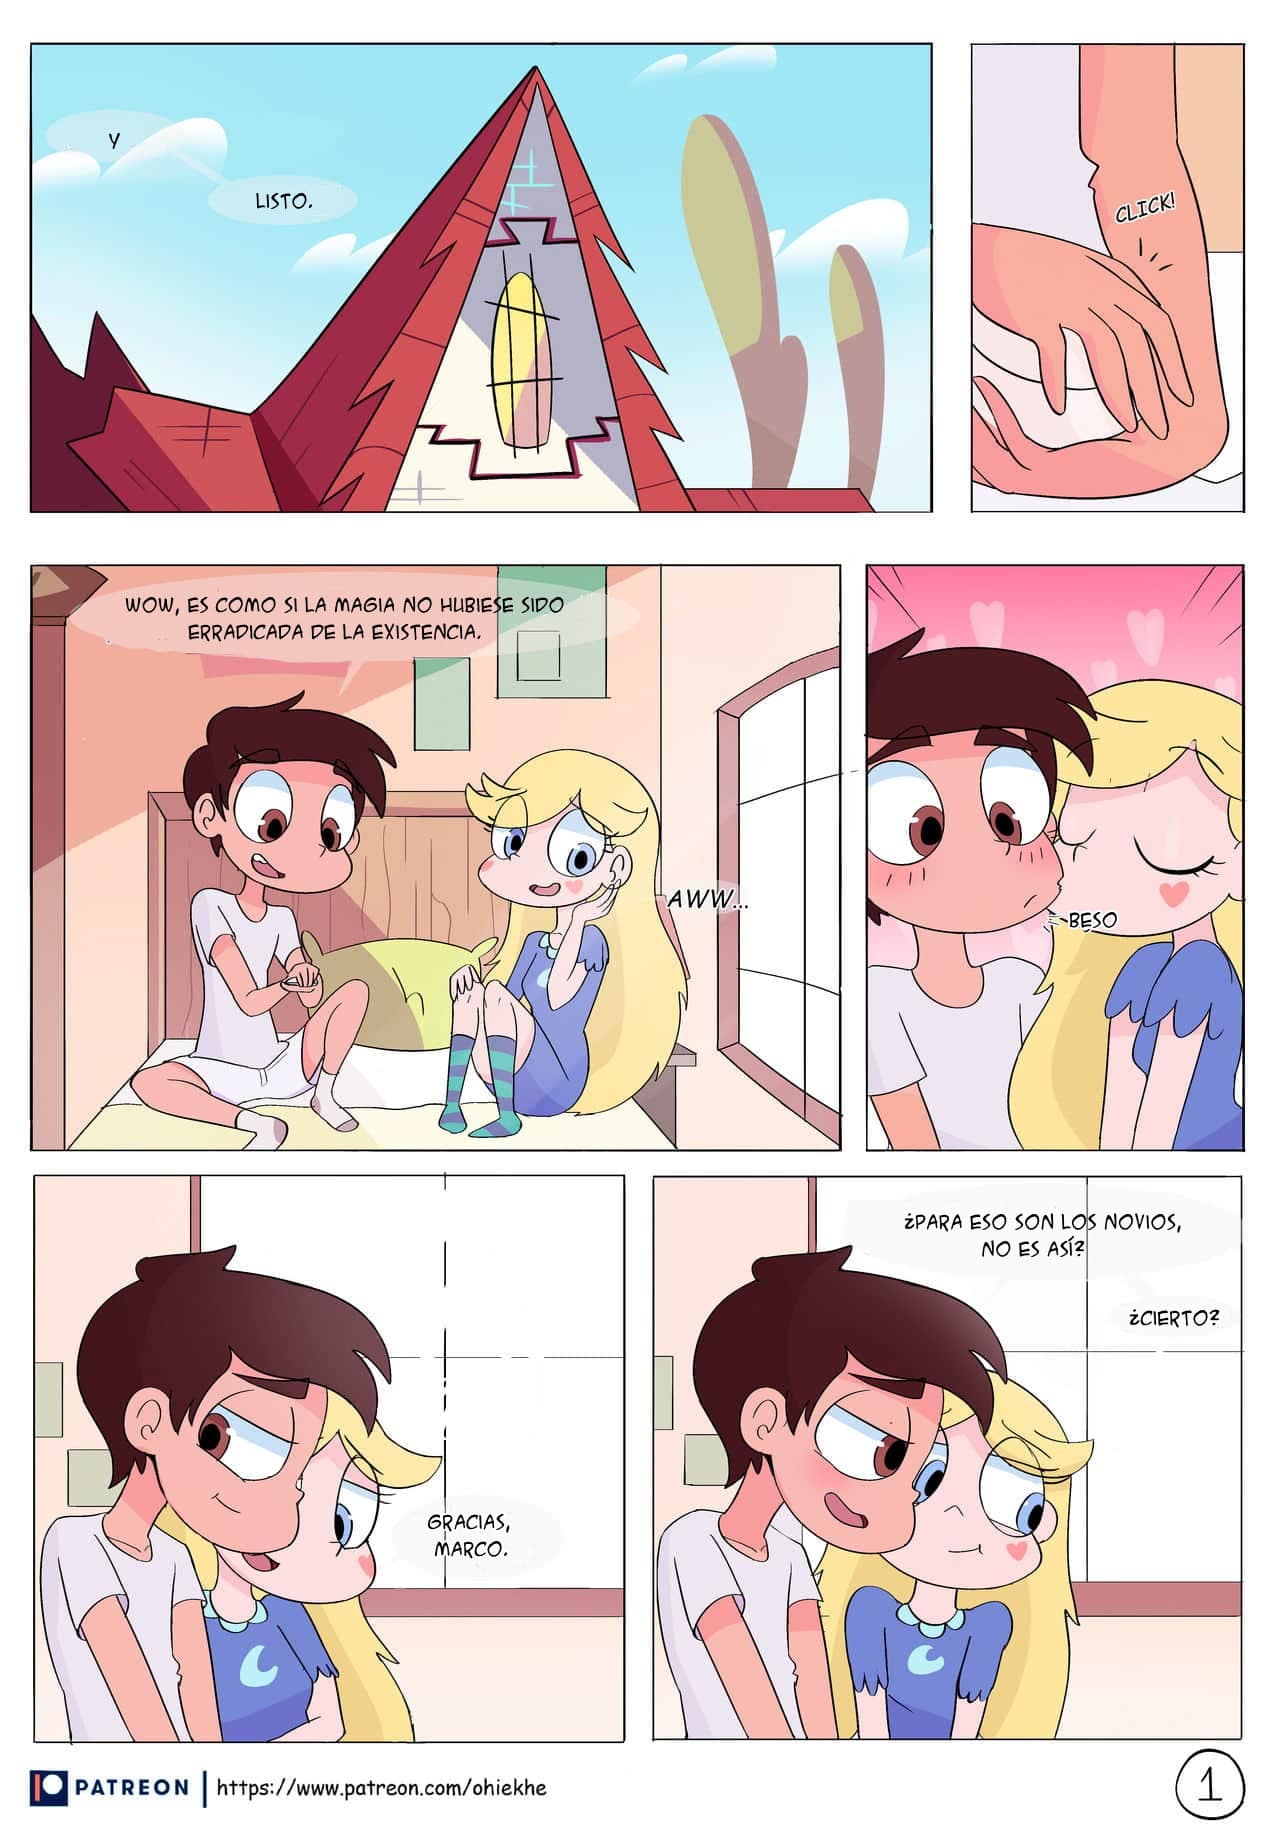 Time Alone – Star vs the Forces of Evil - 1